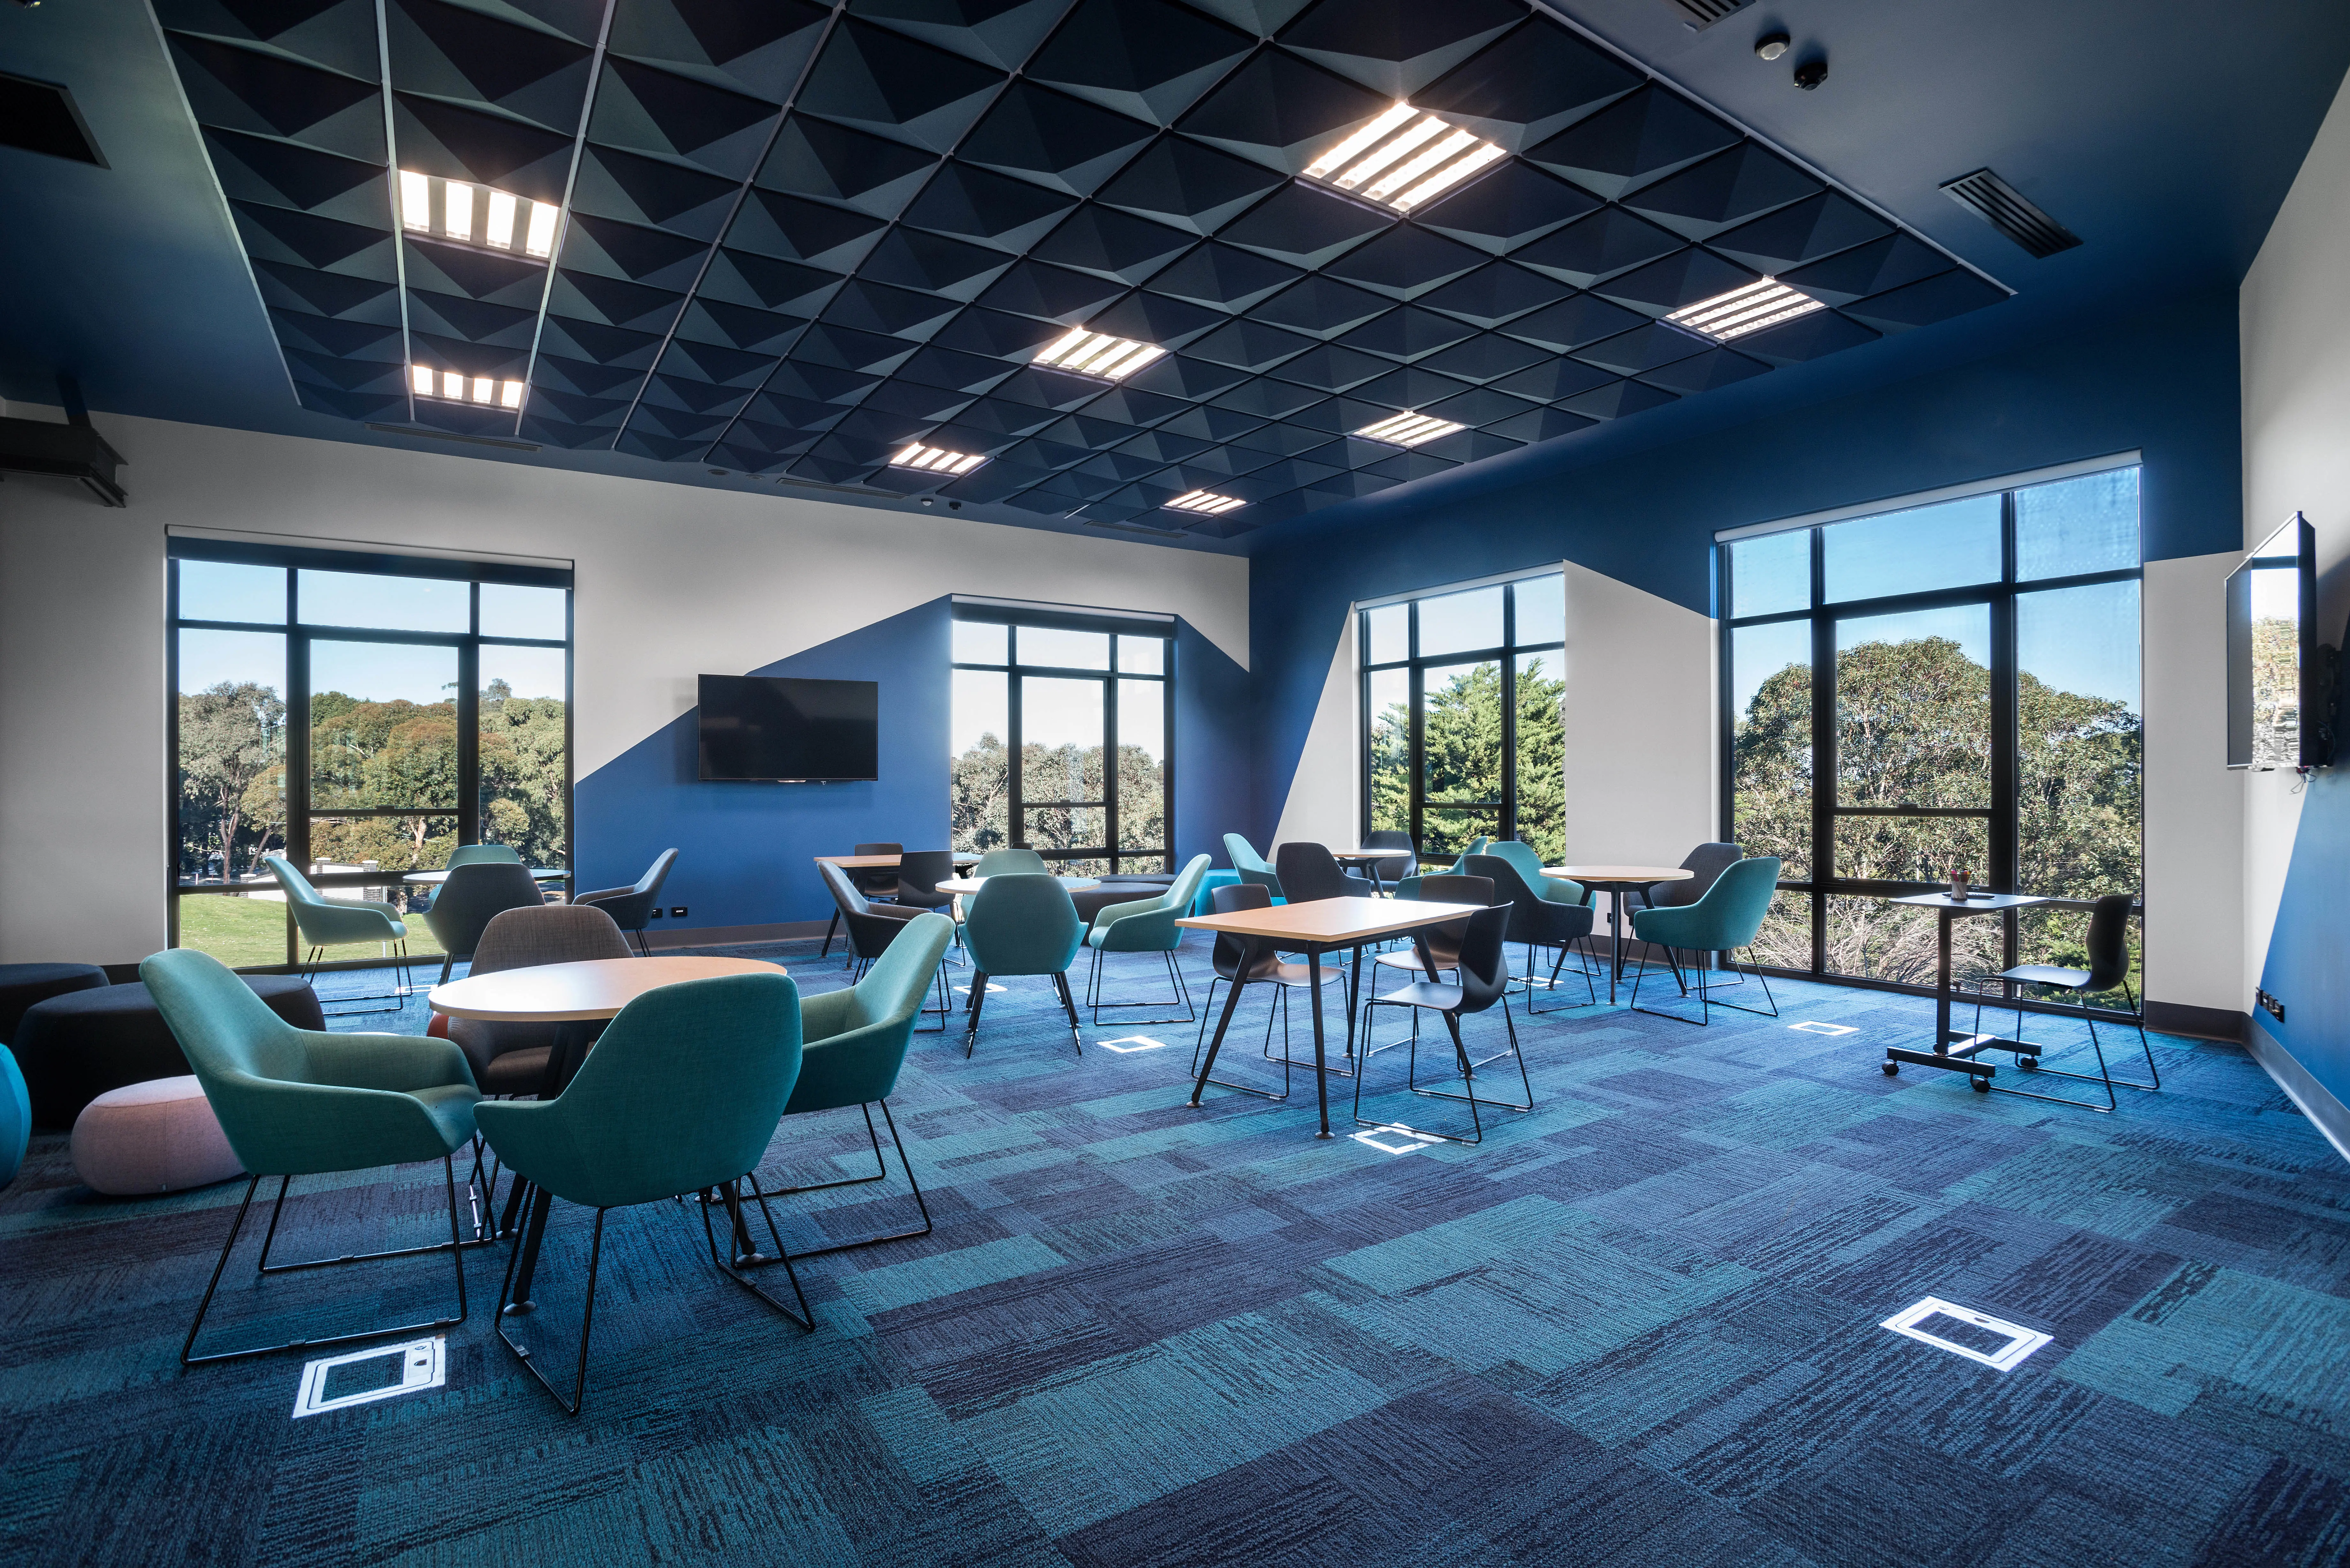 Classroom with carpet in several shades of blue, blue ceiling and blue and white walls.